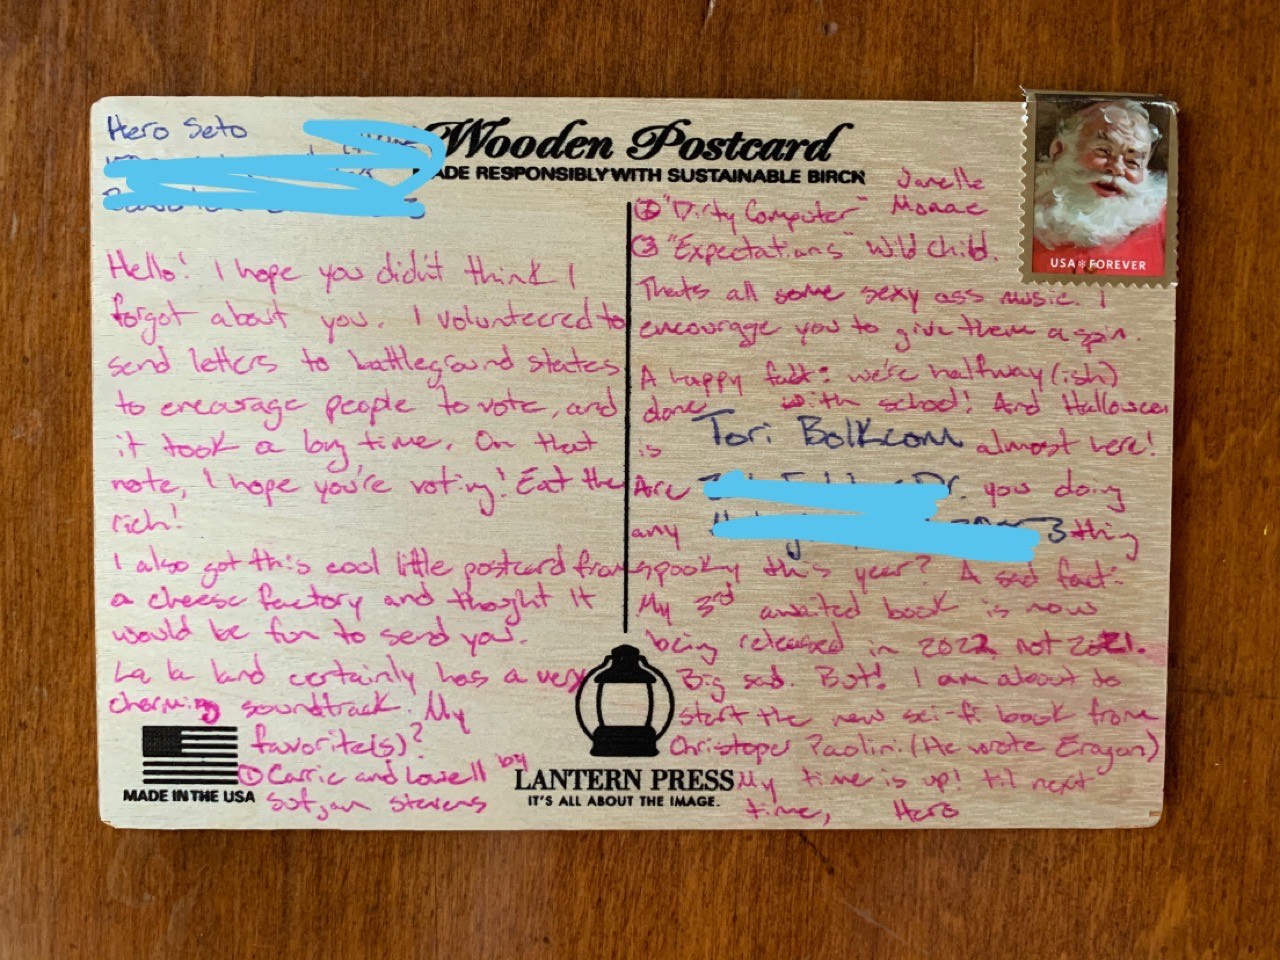 Bolkcom shared this wooden postcard she recently received from Hero Seto, a graduate student in Oregon.